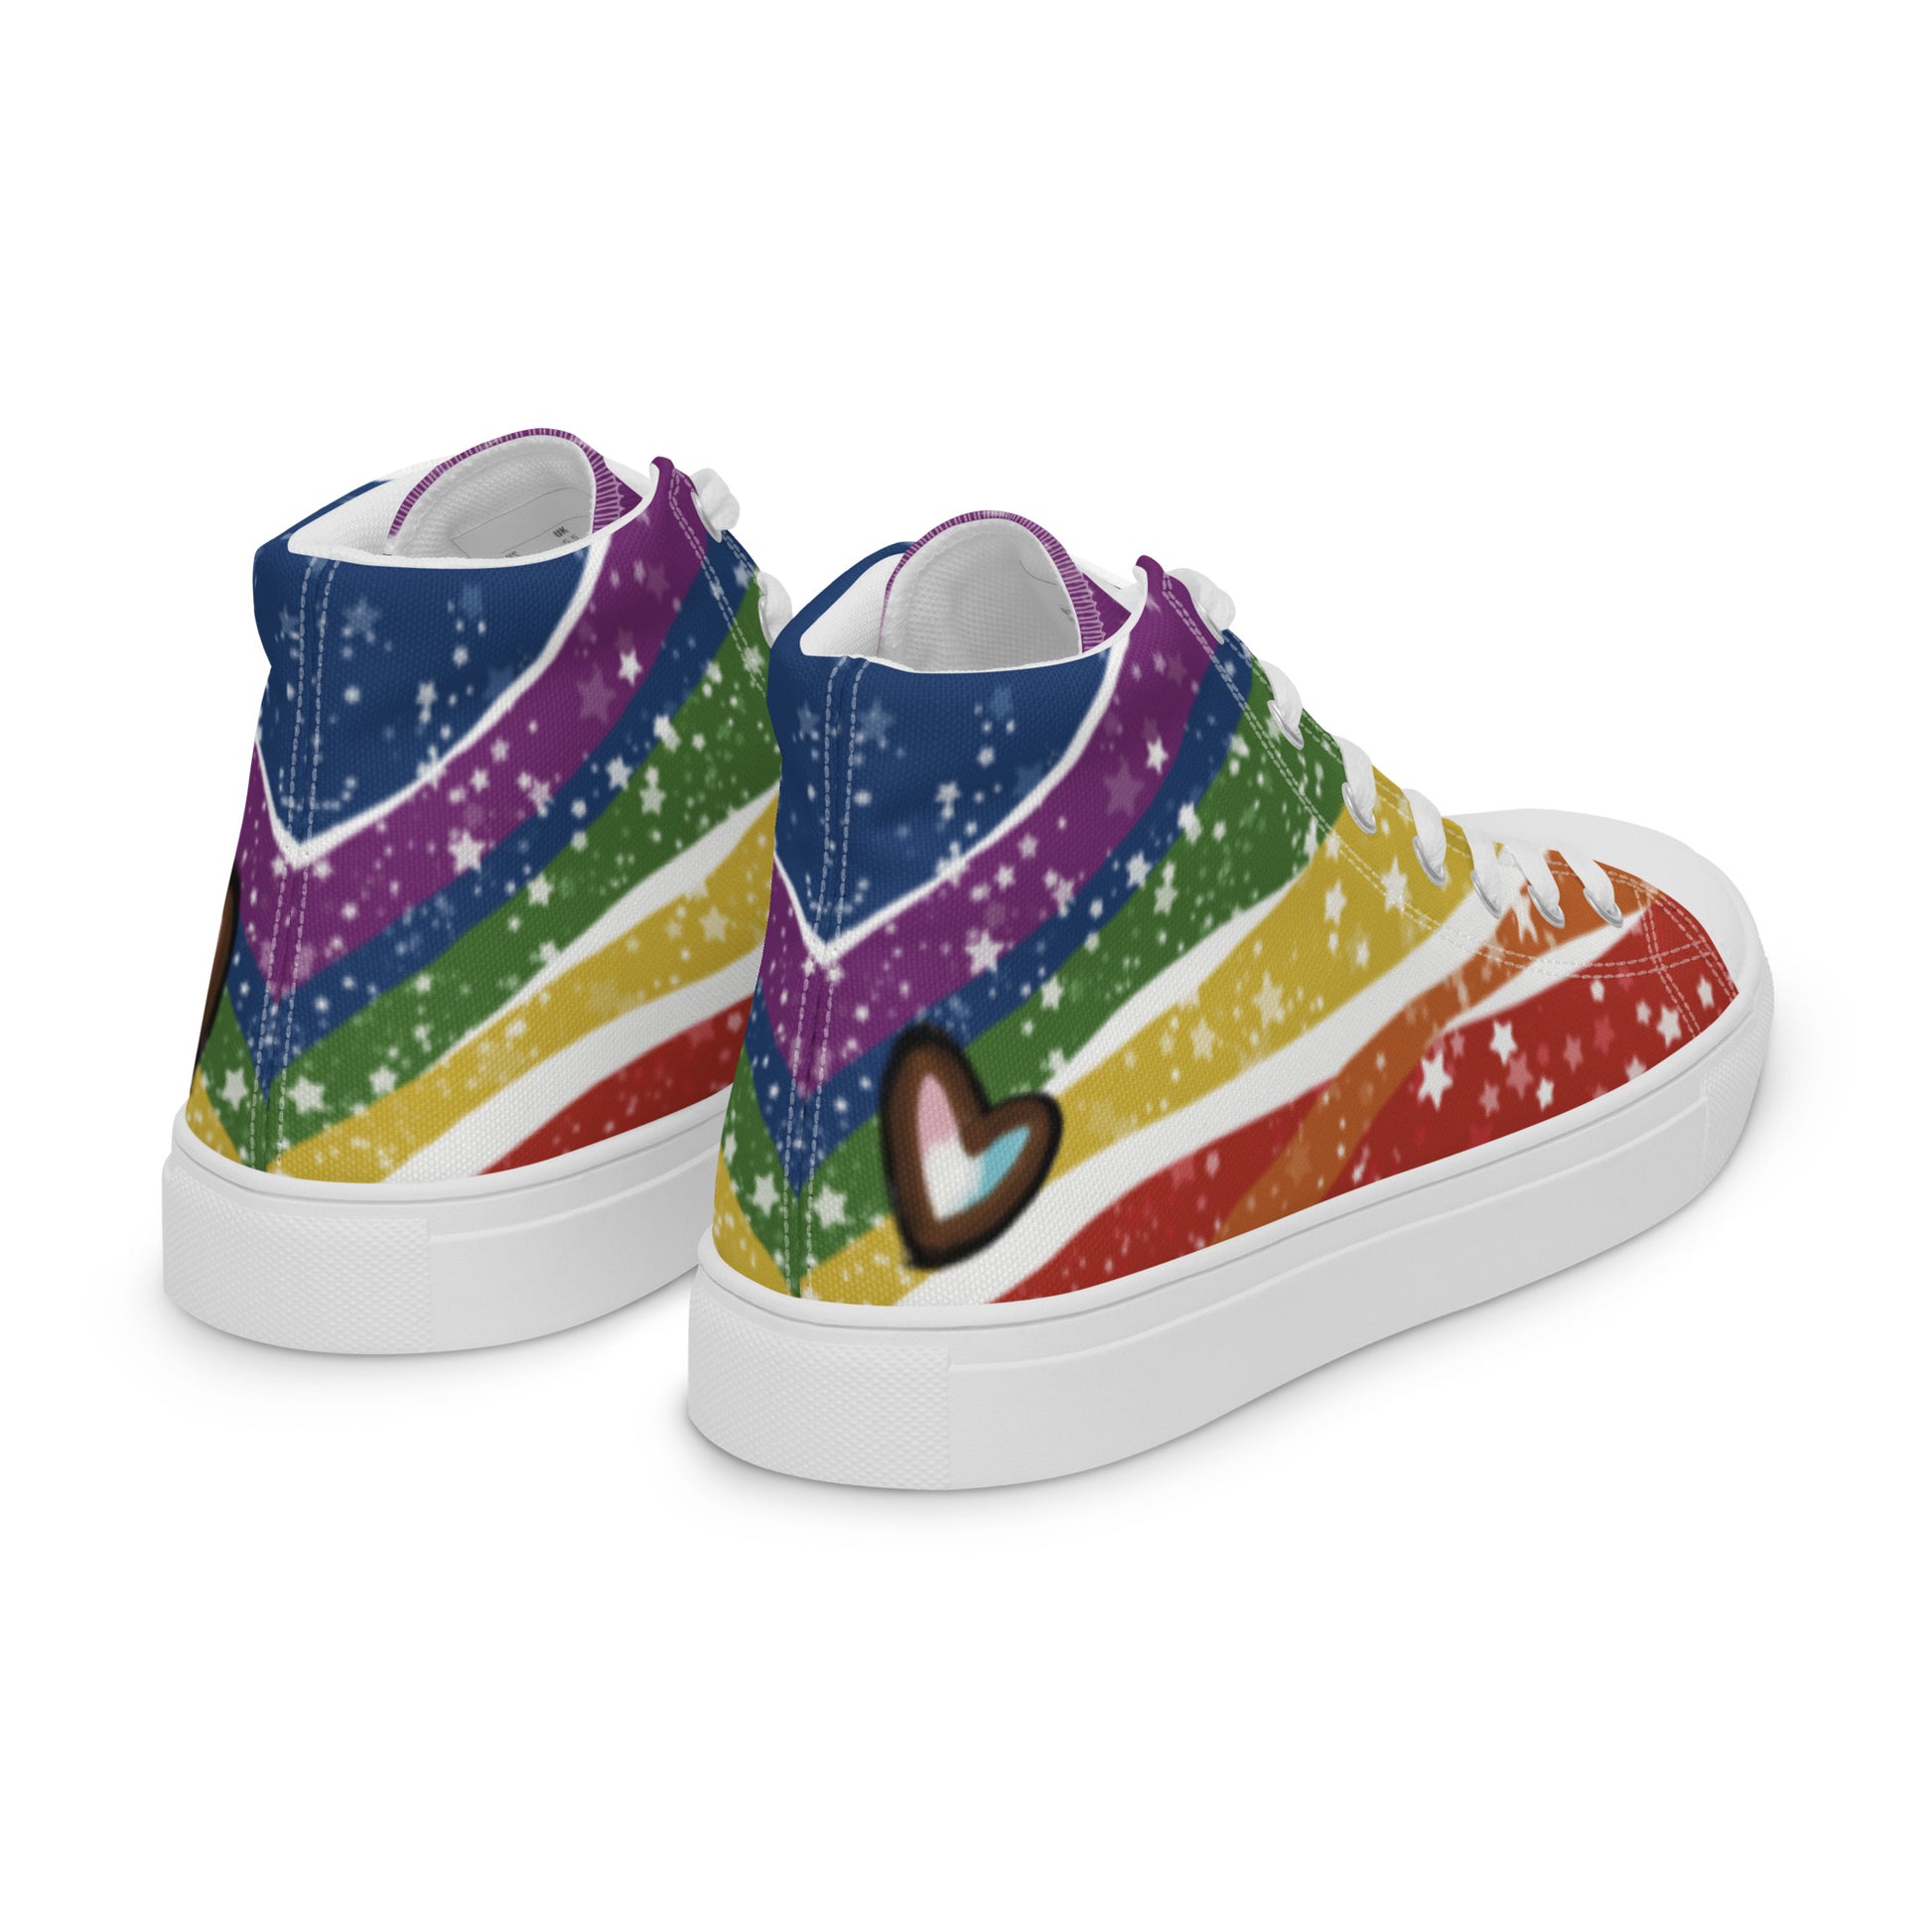 A pair of high top shoes have wavy rainbow stripes coming from the heel and getting wider towards the laces, covered in stars, with a double heart in black and brown containing the Trans Pride flag near the heel.